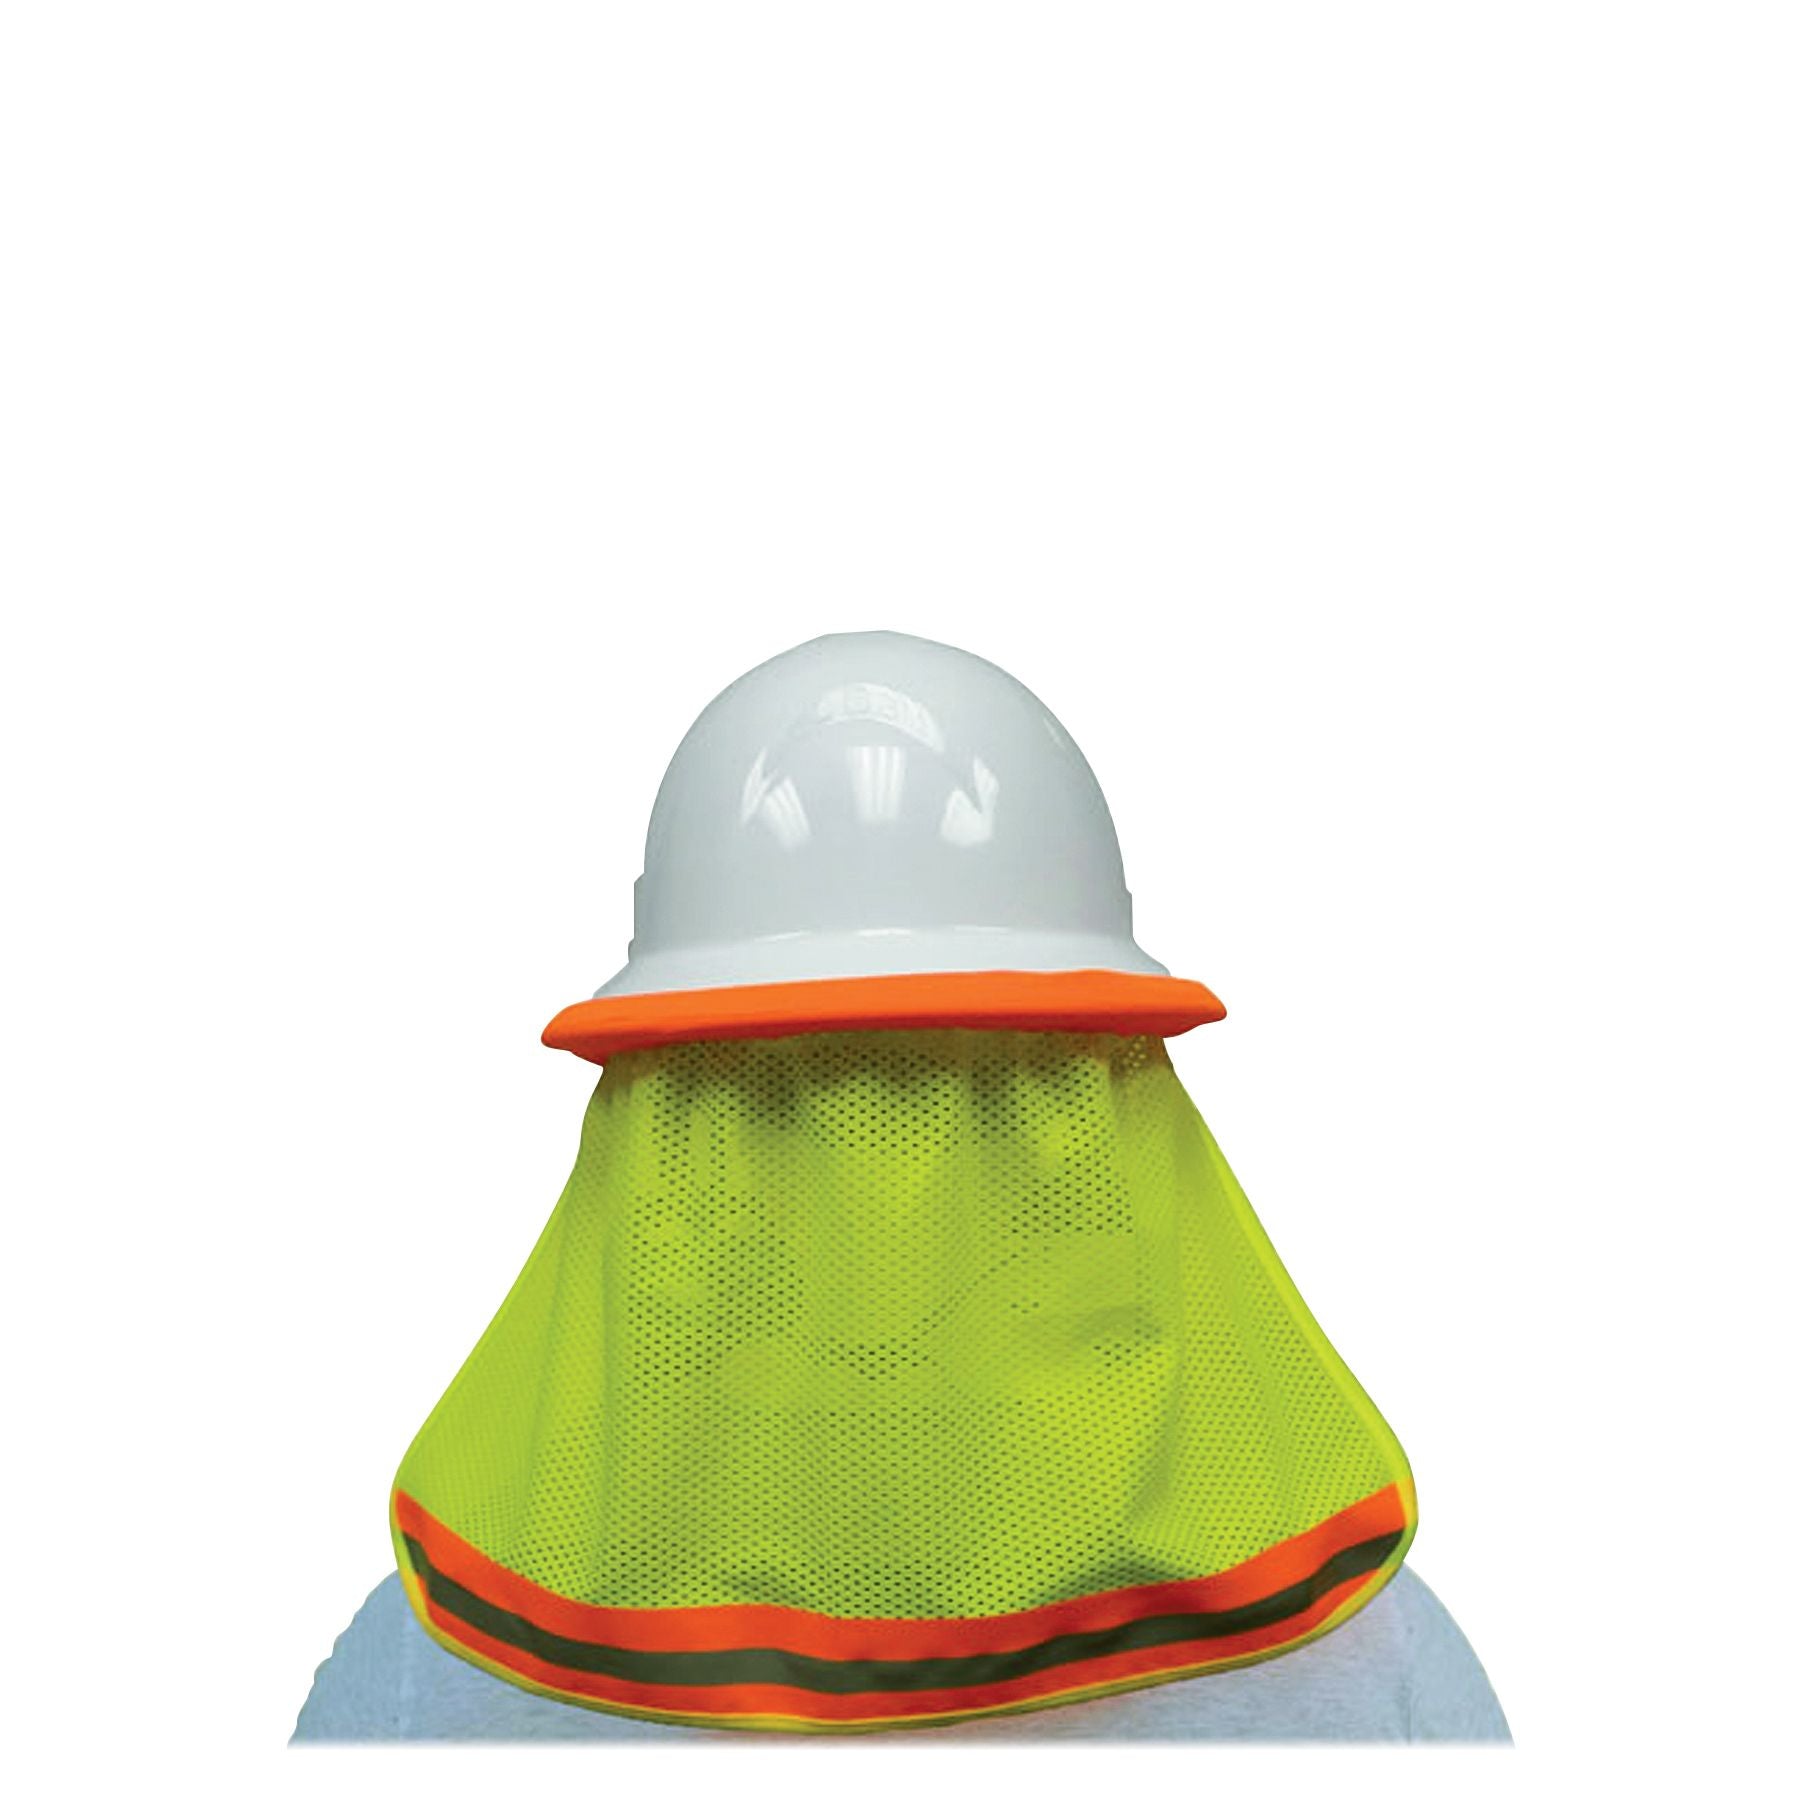 SitePro 23-SNC5500 Neck Shade for Hard Hats, Safety Flo-Lime